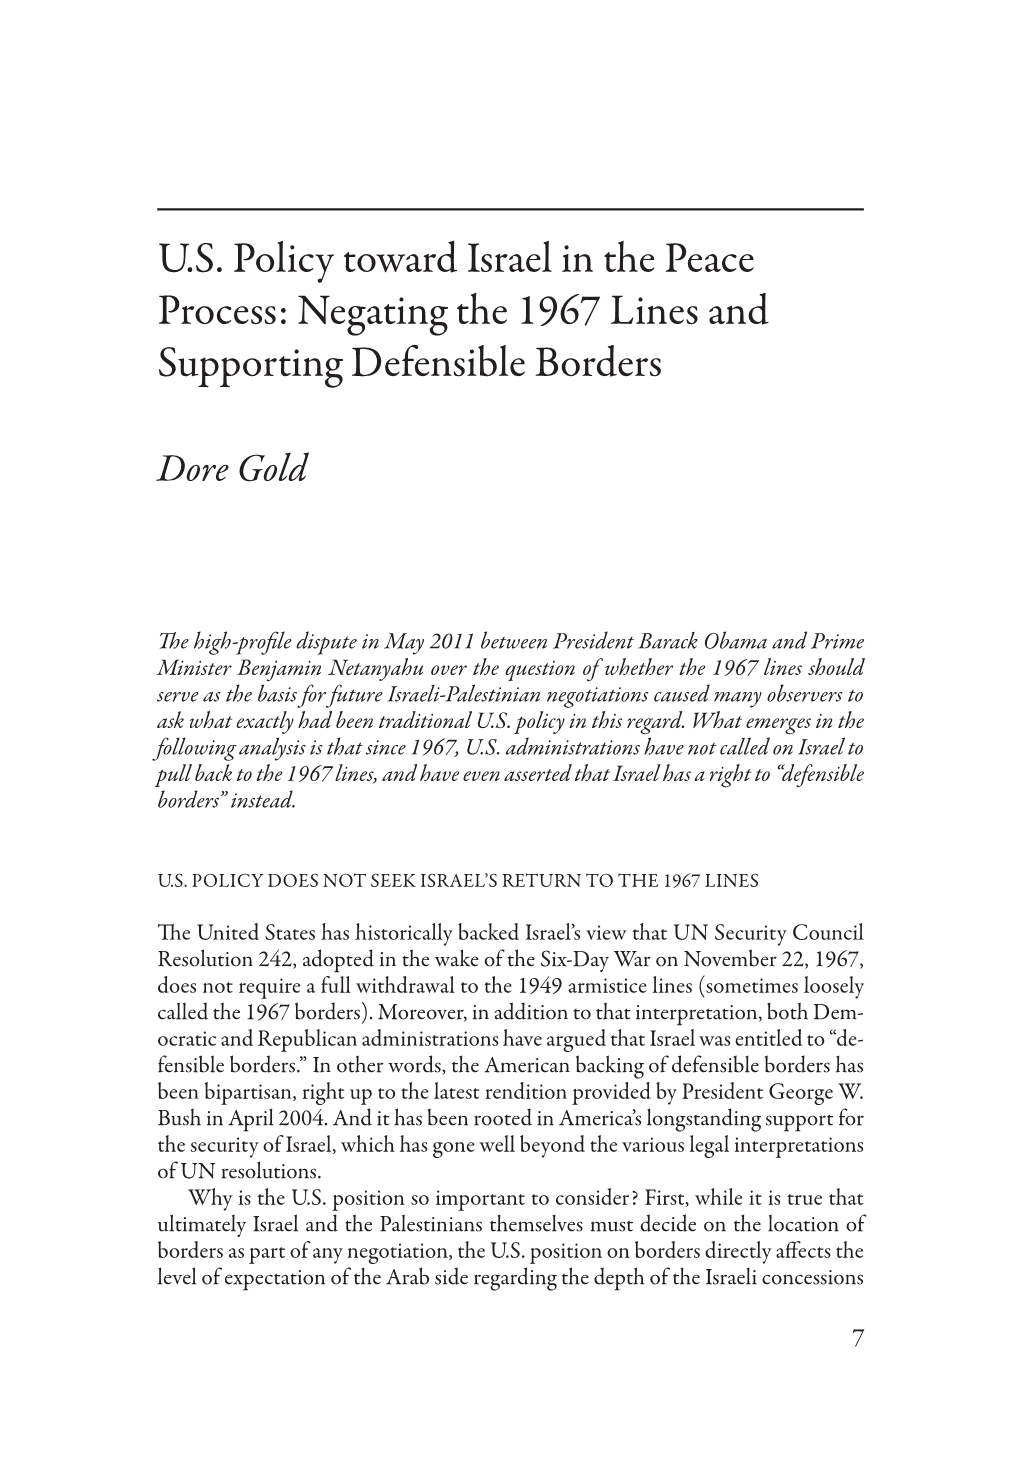 US Policy Toward Israel in the Peace Process